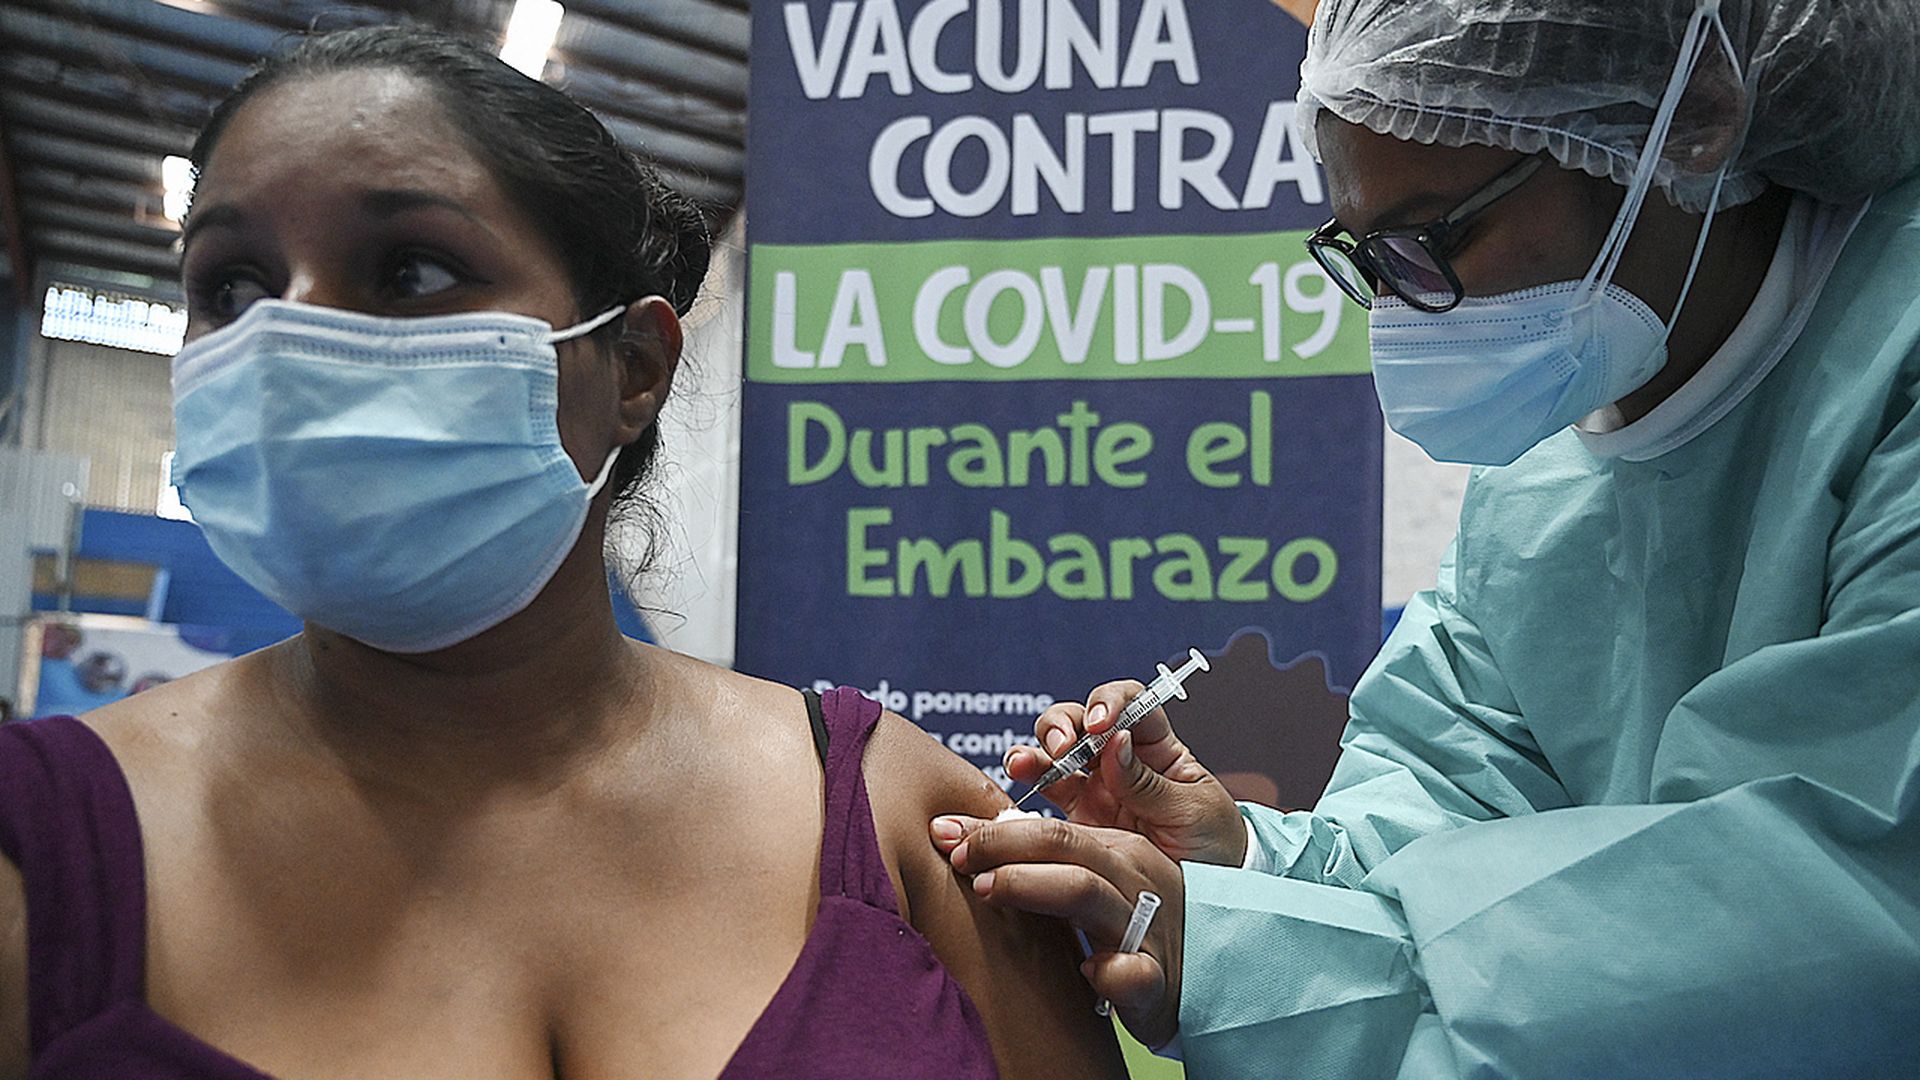 A woman wearing a medical mask gets a vaccine during an event to get more pregnant women vaccinated in Honduras